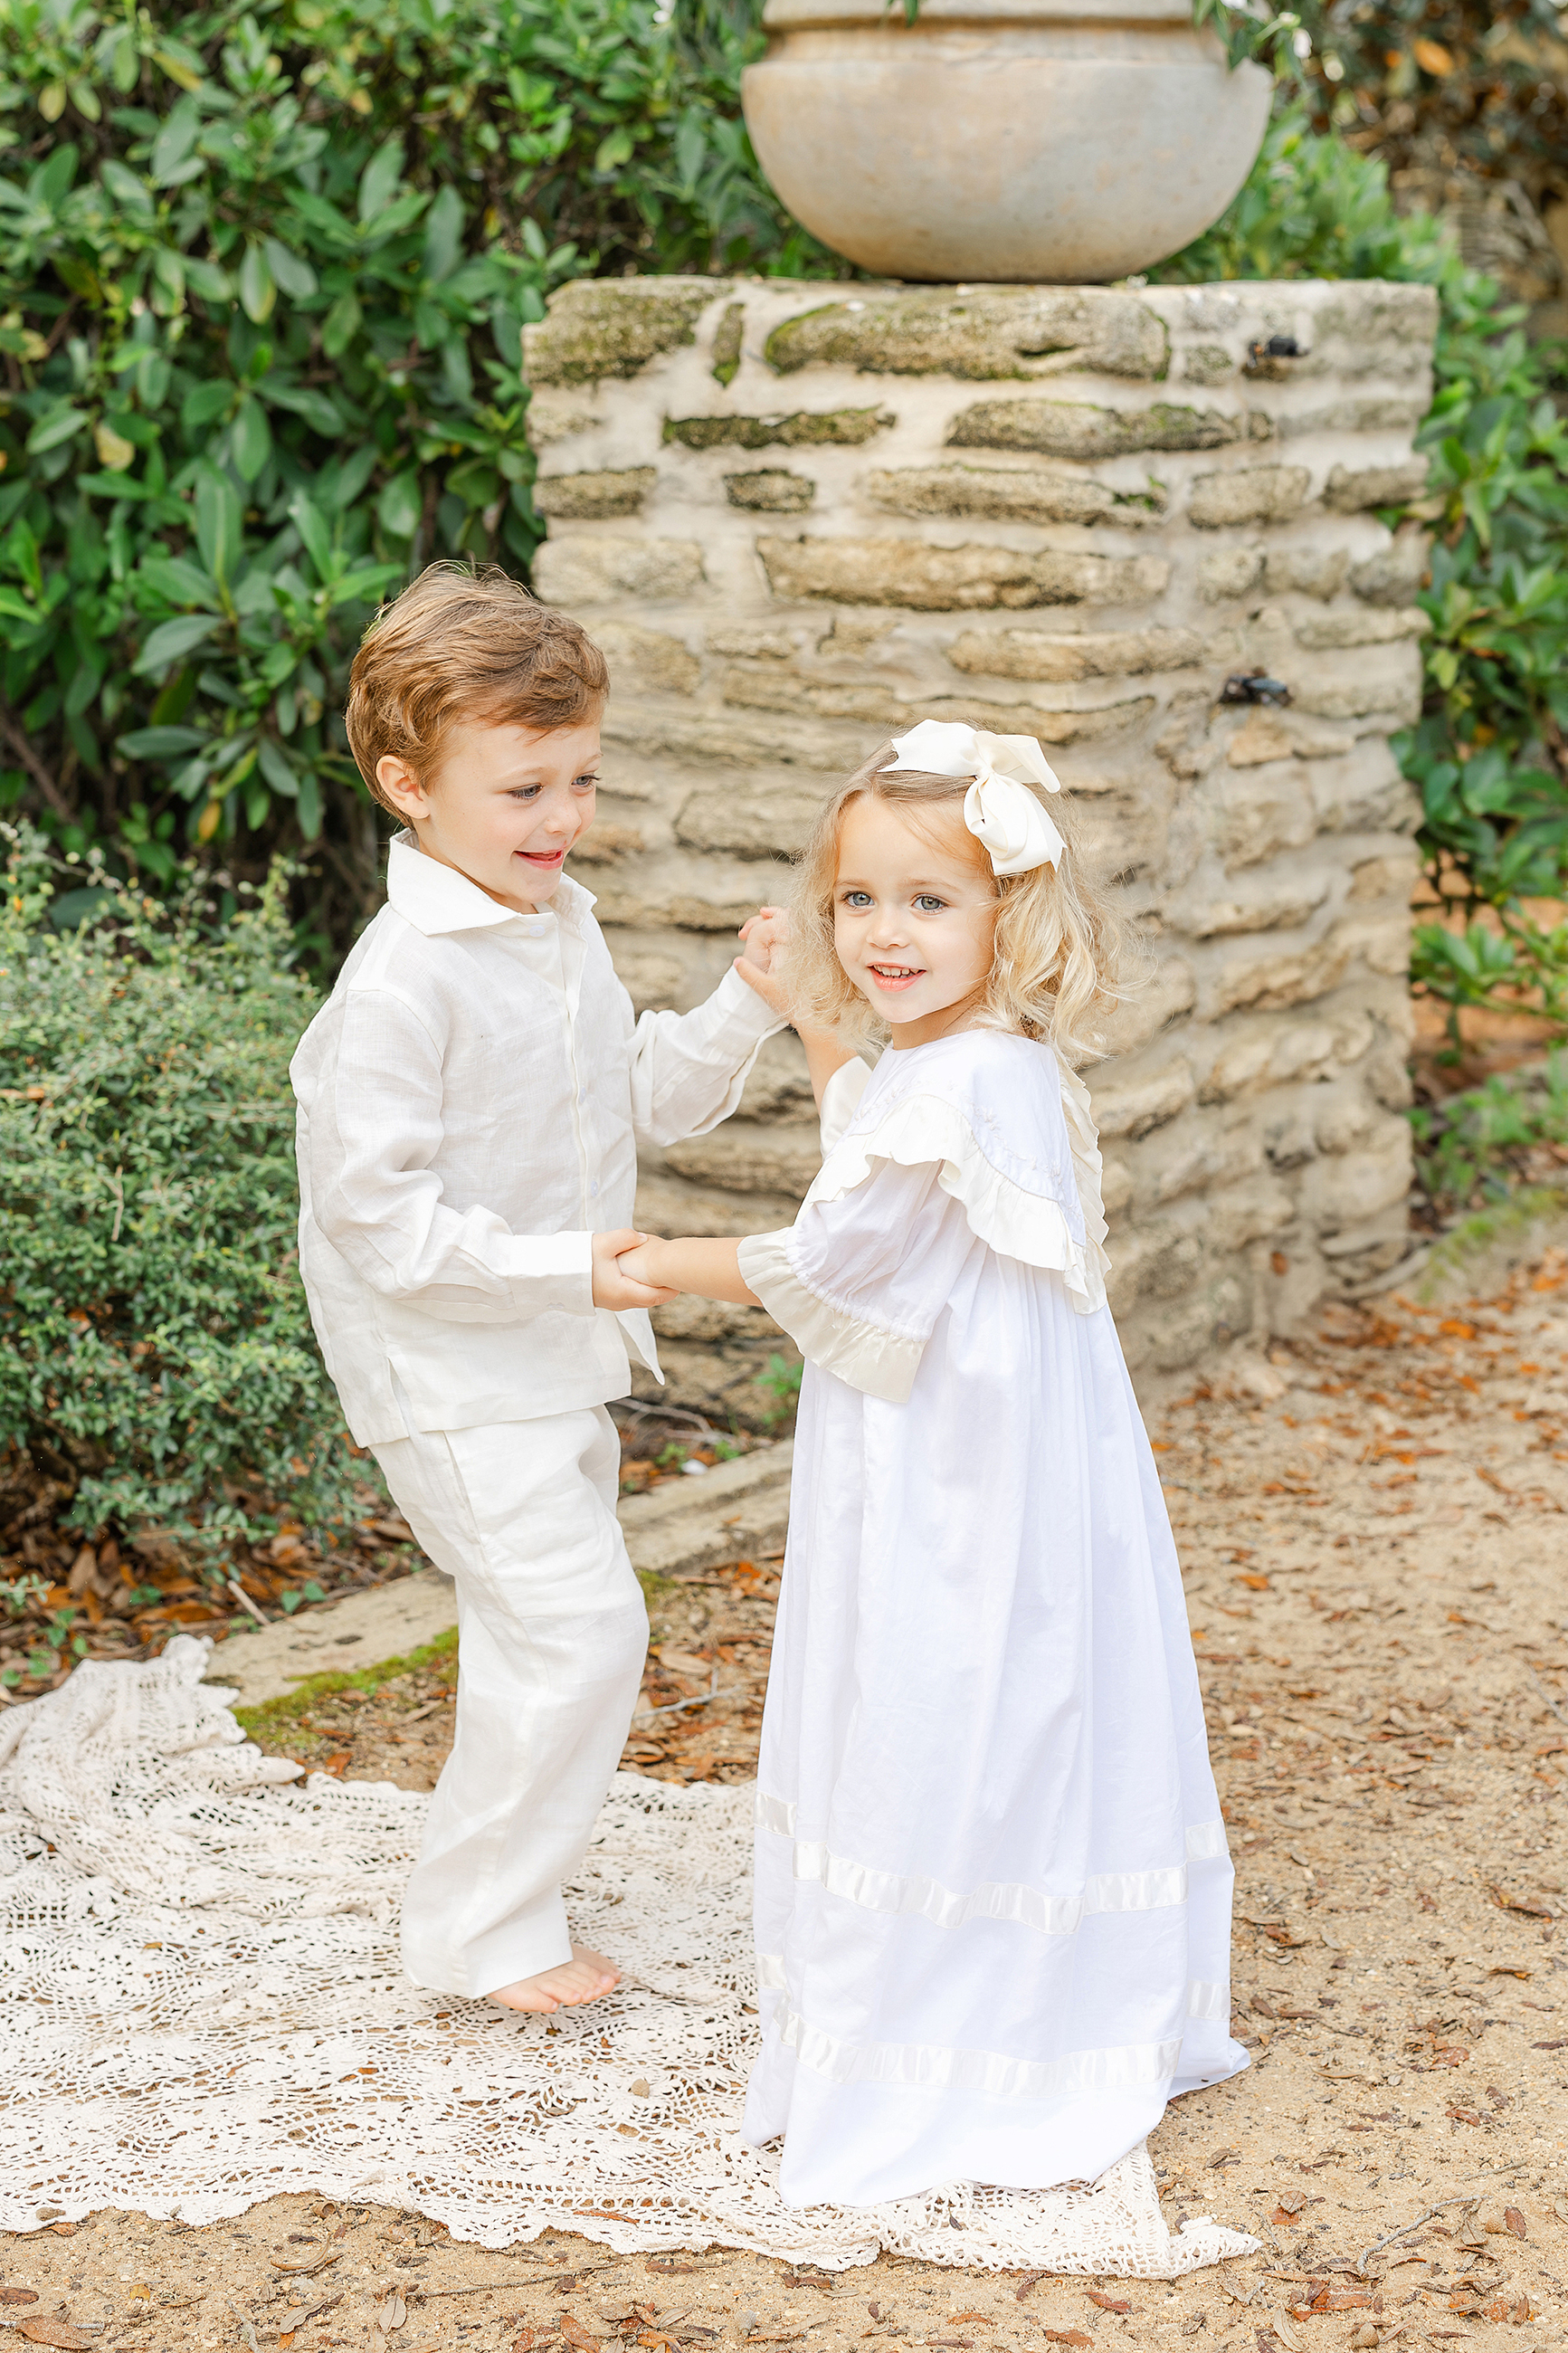 A spring portrait of two children dressed in white dancing together at Washington Oaks Gardens State Park.